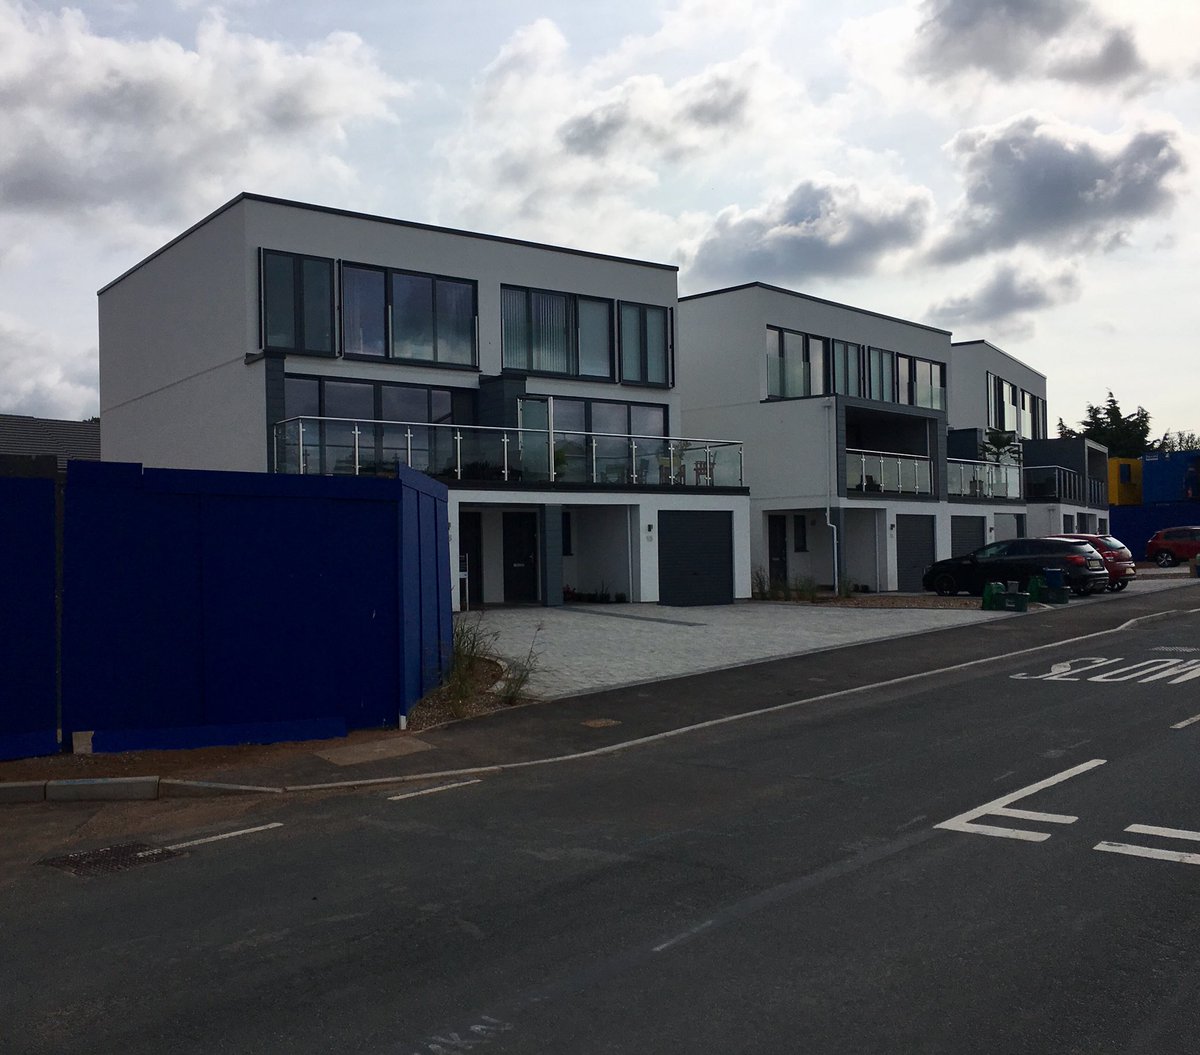 The first phase of ‘Mudbanks’ Exmouth are now occupied, with a lovely view across the Exe estuary. First project by Western Counties Roofing with @ikopolymeric SG-SM membrane on both balconies and main roofs. #exmouth#westerncountiesroofing#singleply